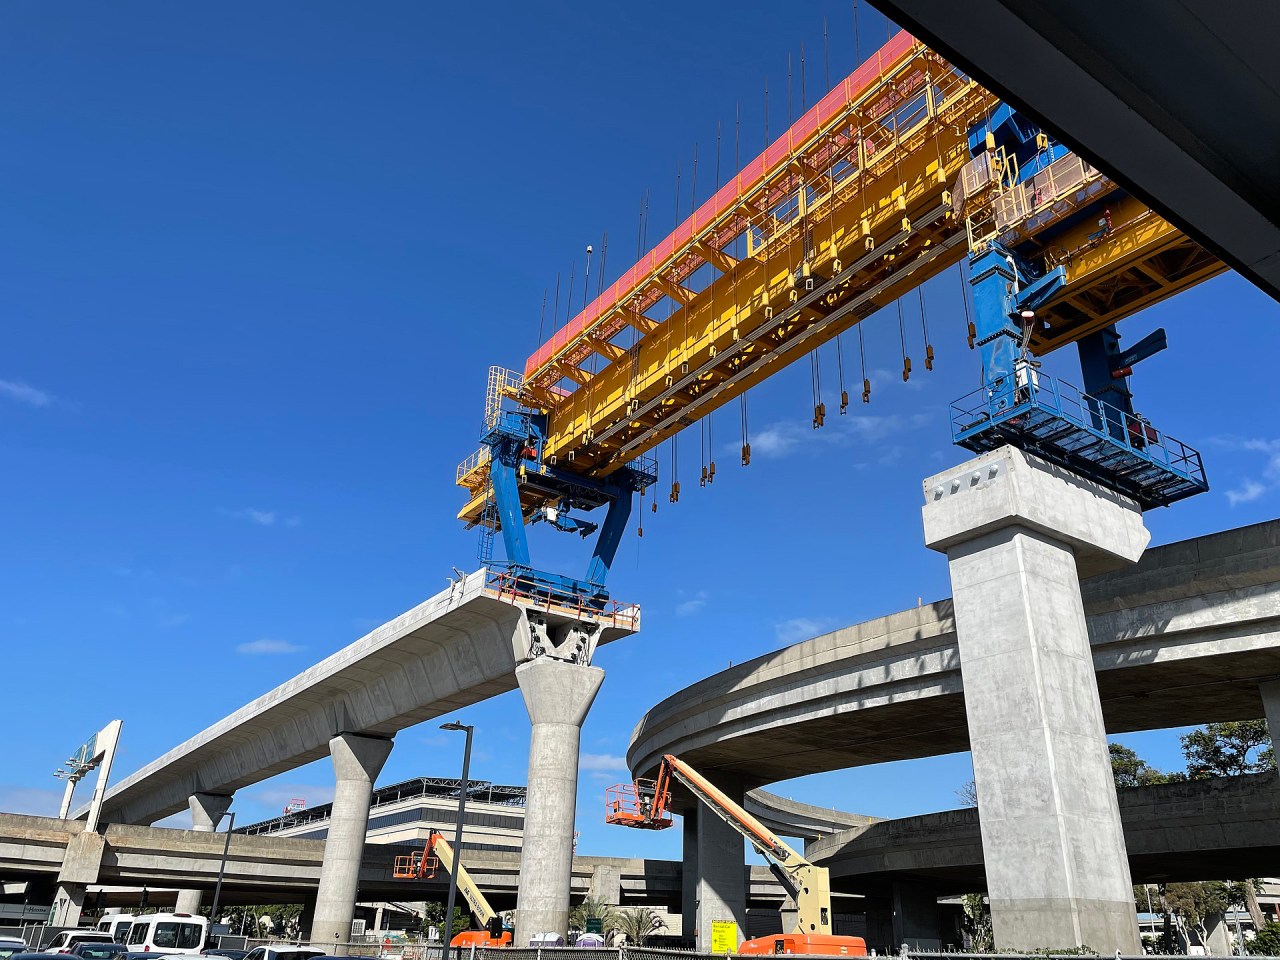 Construction of the elevated HART line near the Honolulu airport in 2020. Photo: Saucy